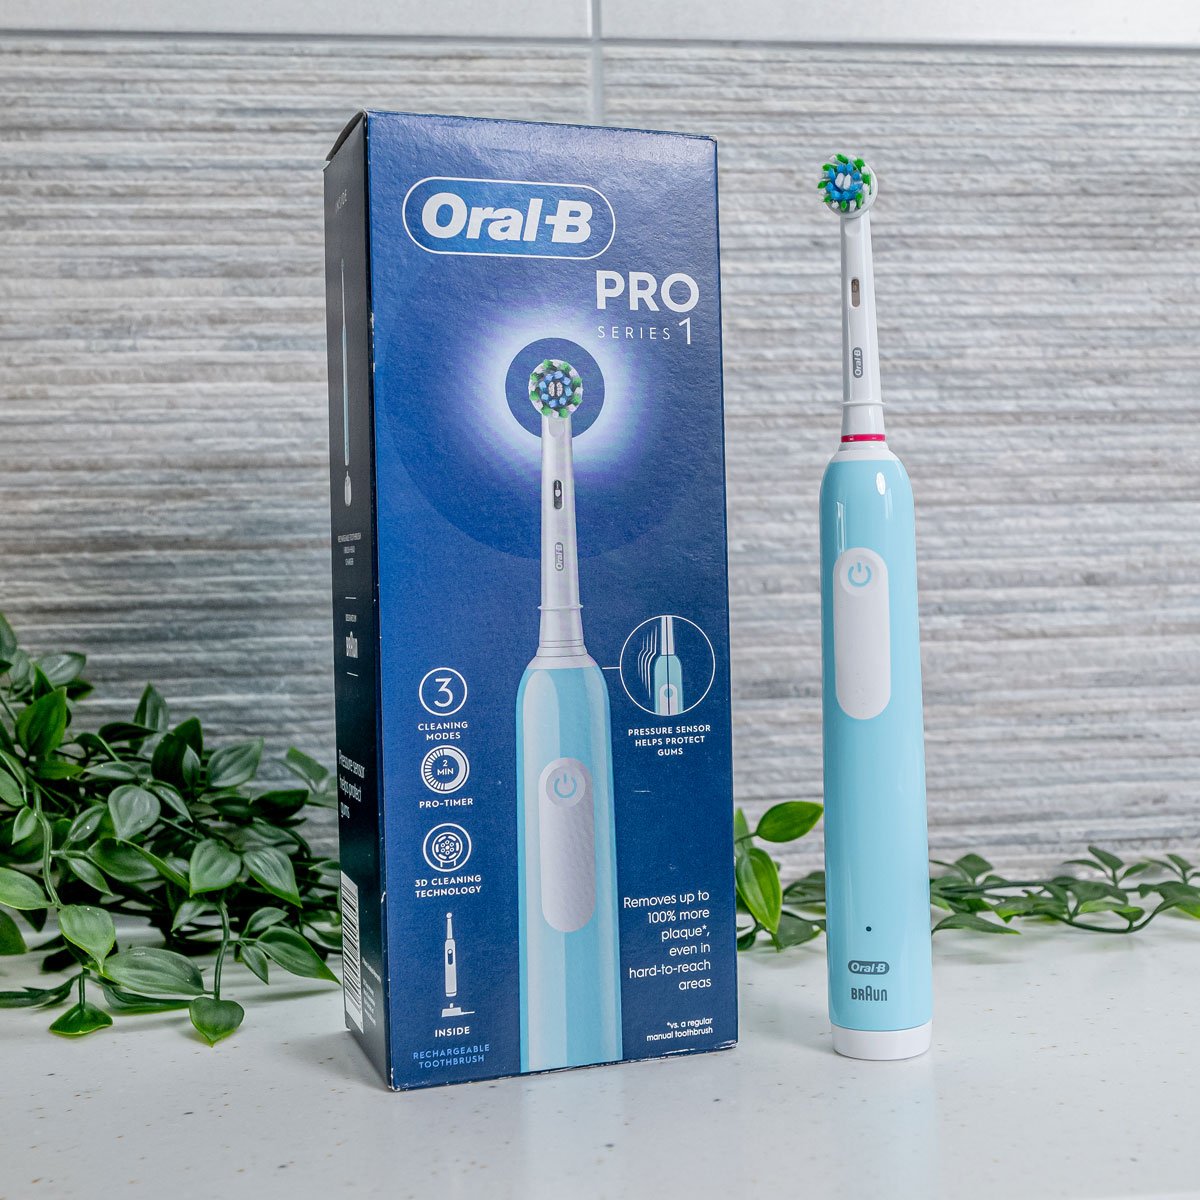 Oral-B Pro 1 with box stood on a countertop